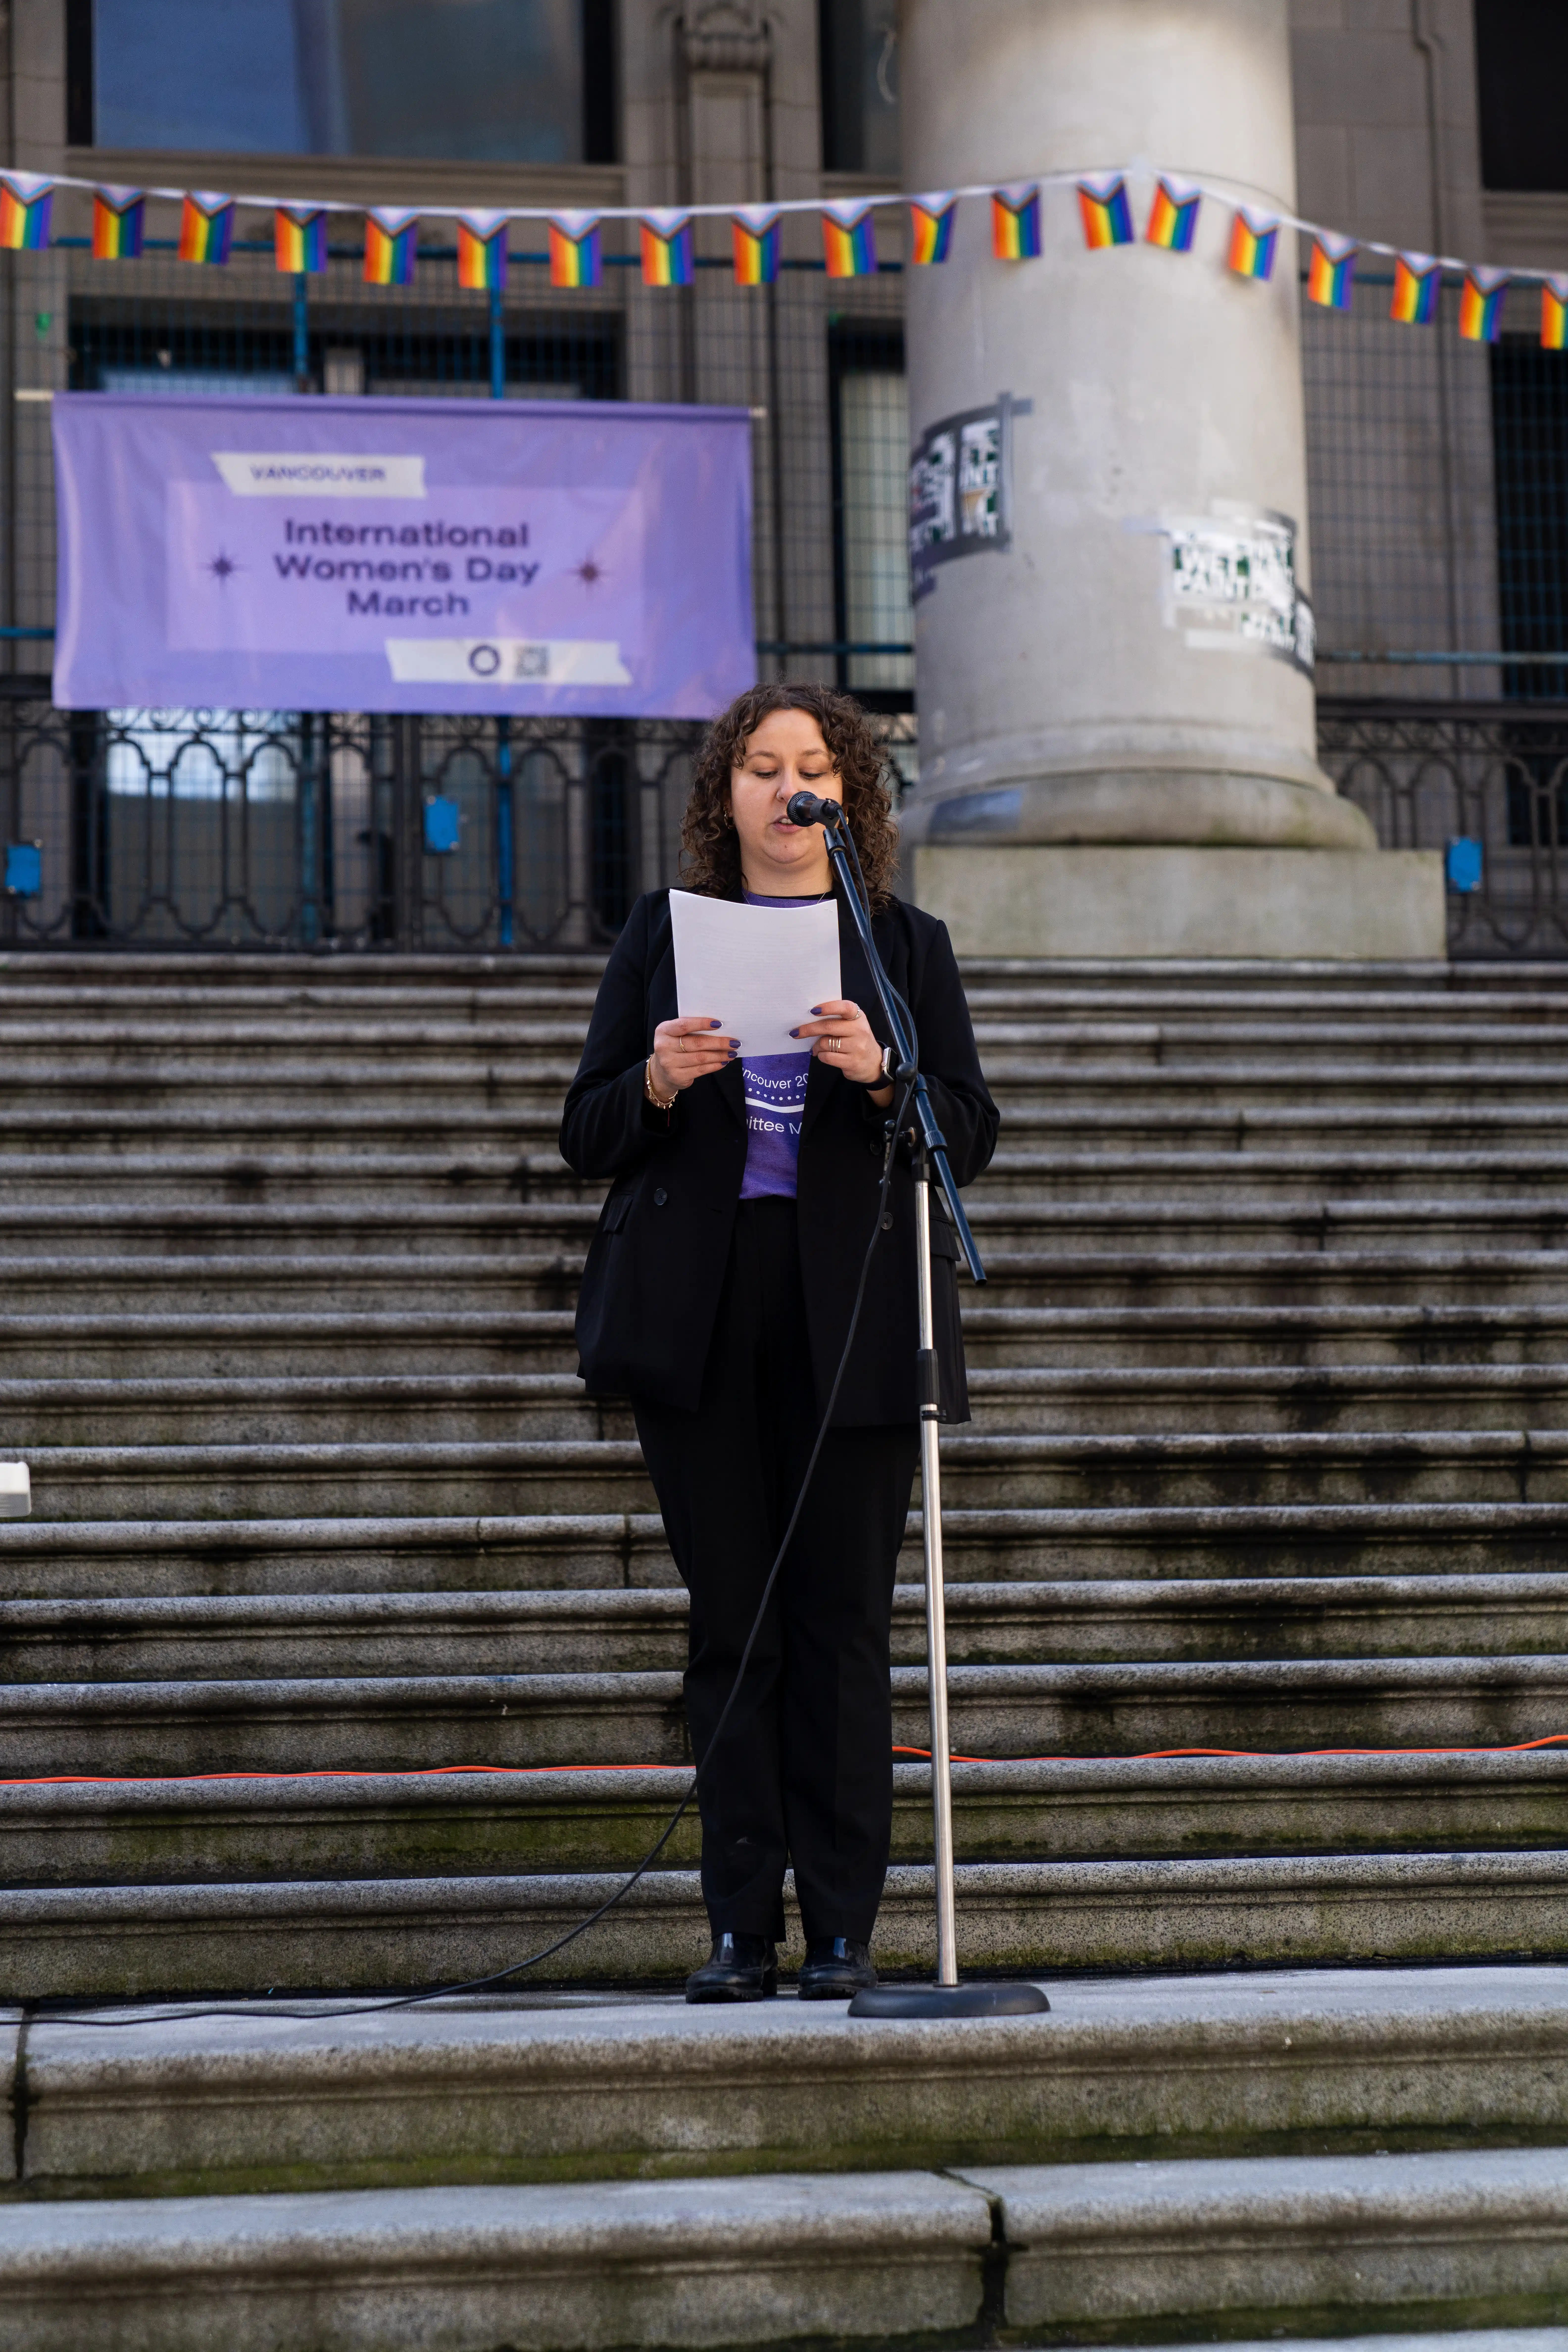 This photo is of the committee chair, at the 2023 Vancouver International Women’s Day march. She is standing on a large platform of stone stairs. She is standing in front of a microphone, reading off of paper to an audience. Behind her, is a large purple banner that reads International Women’s Day. She is wearing a black pant suit, with a purple shirt underneath. 

                    